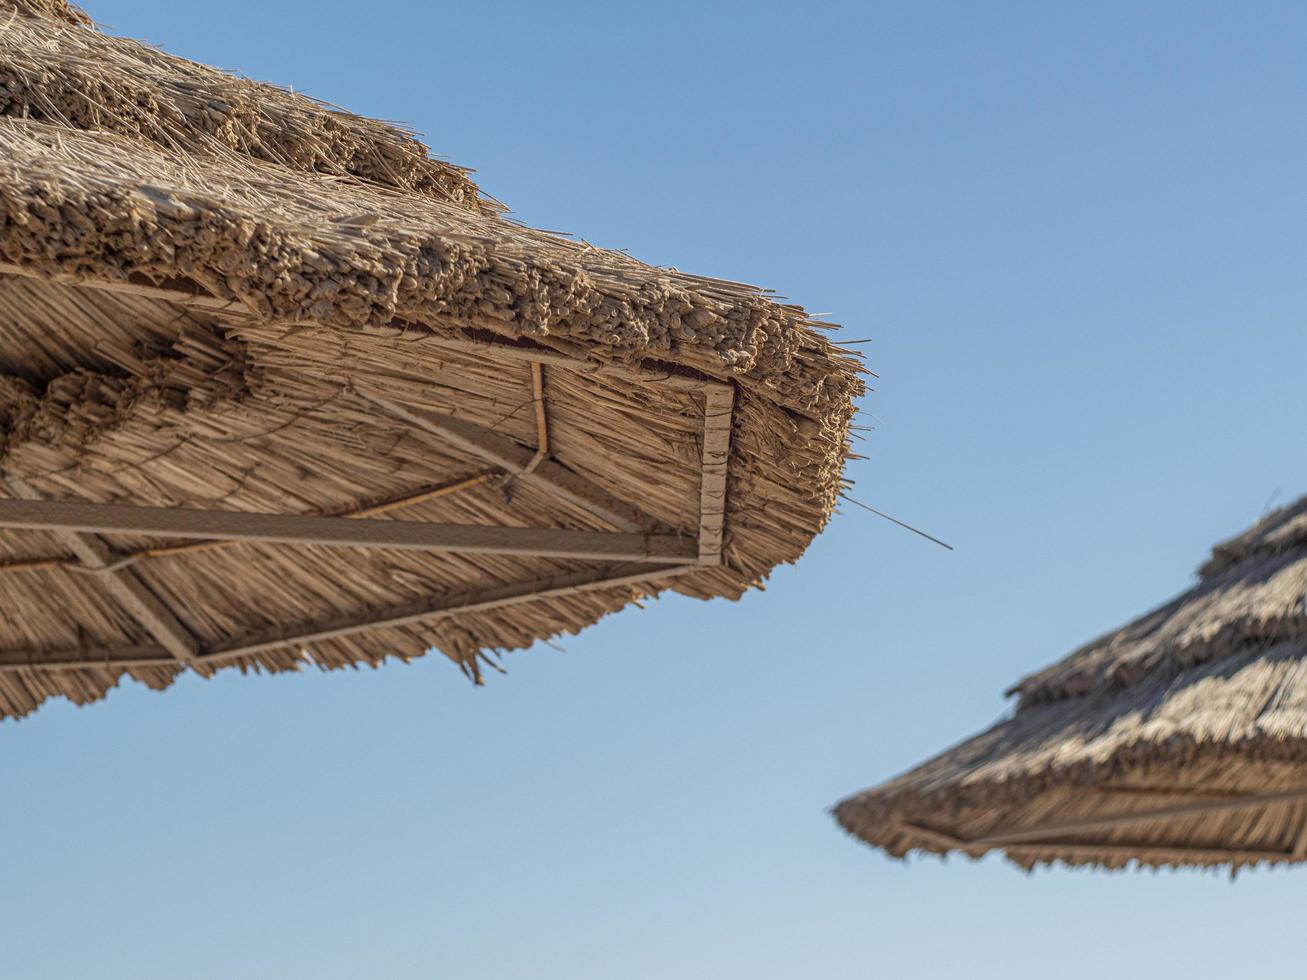 Straw Roof Of Beach Umbrella And Blue Sky In Background photo